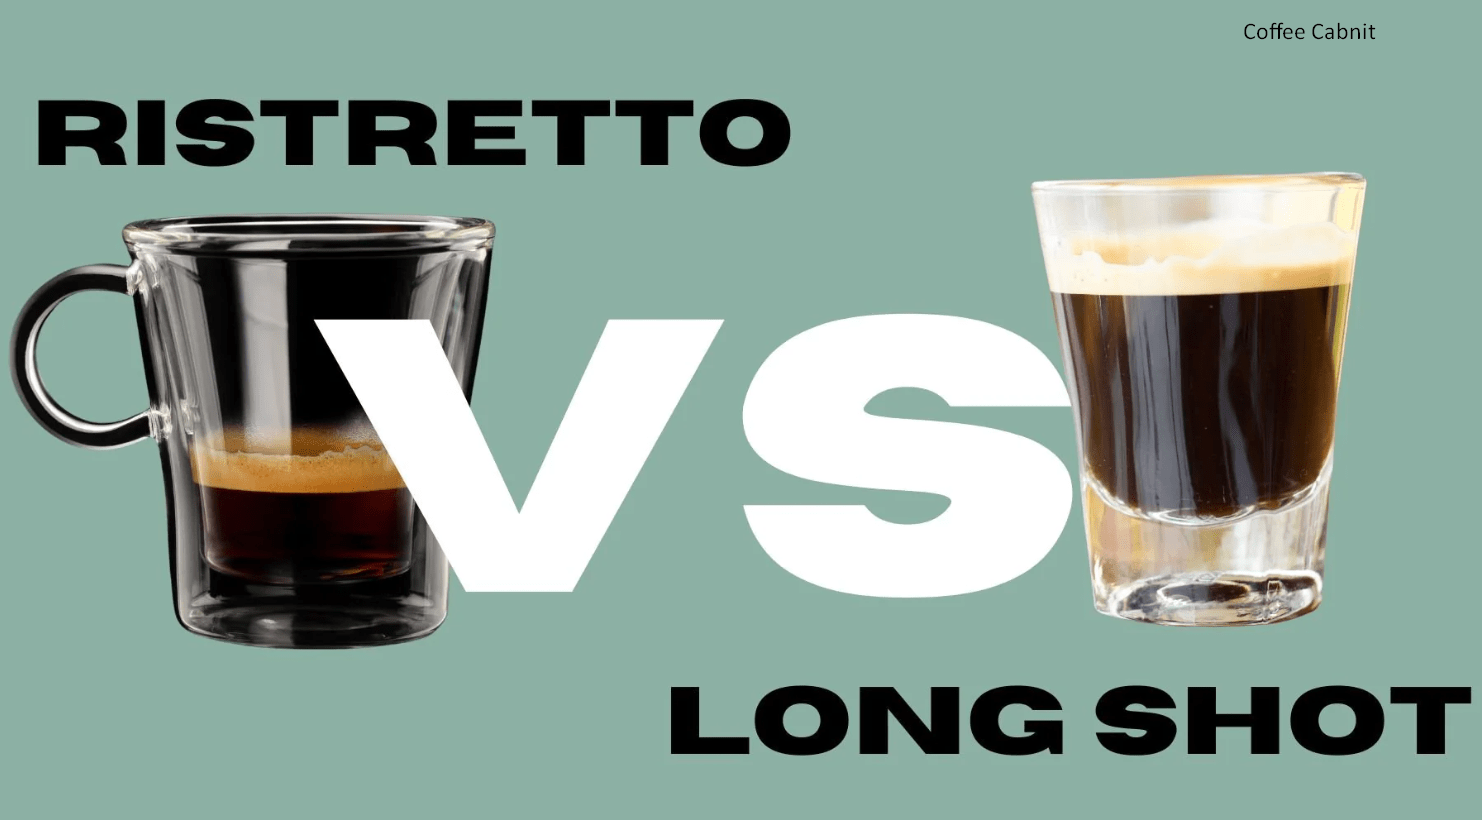 Ristretto or Long Shot